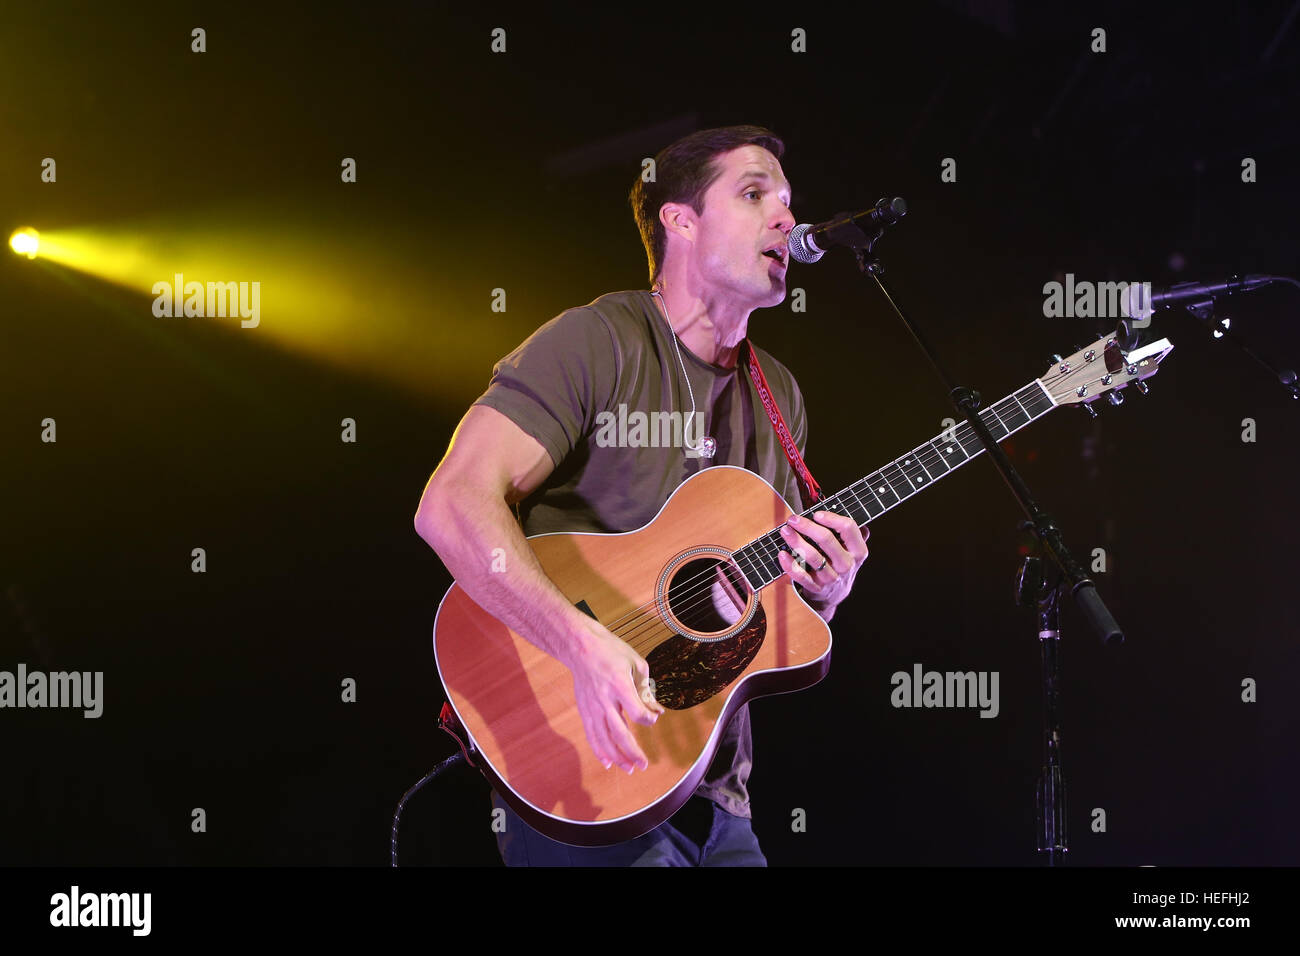 NEW YORK-DEC 16: Singer Walker Hayes performs in concert at PlayStation Theater on December 16, 2016 in New York City. Stock Photo